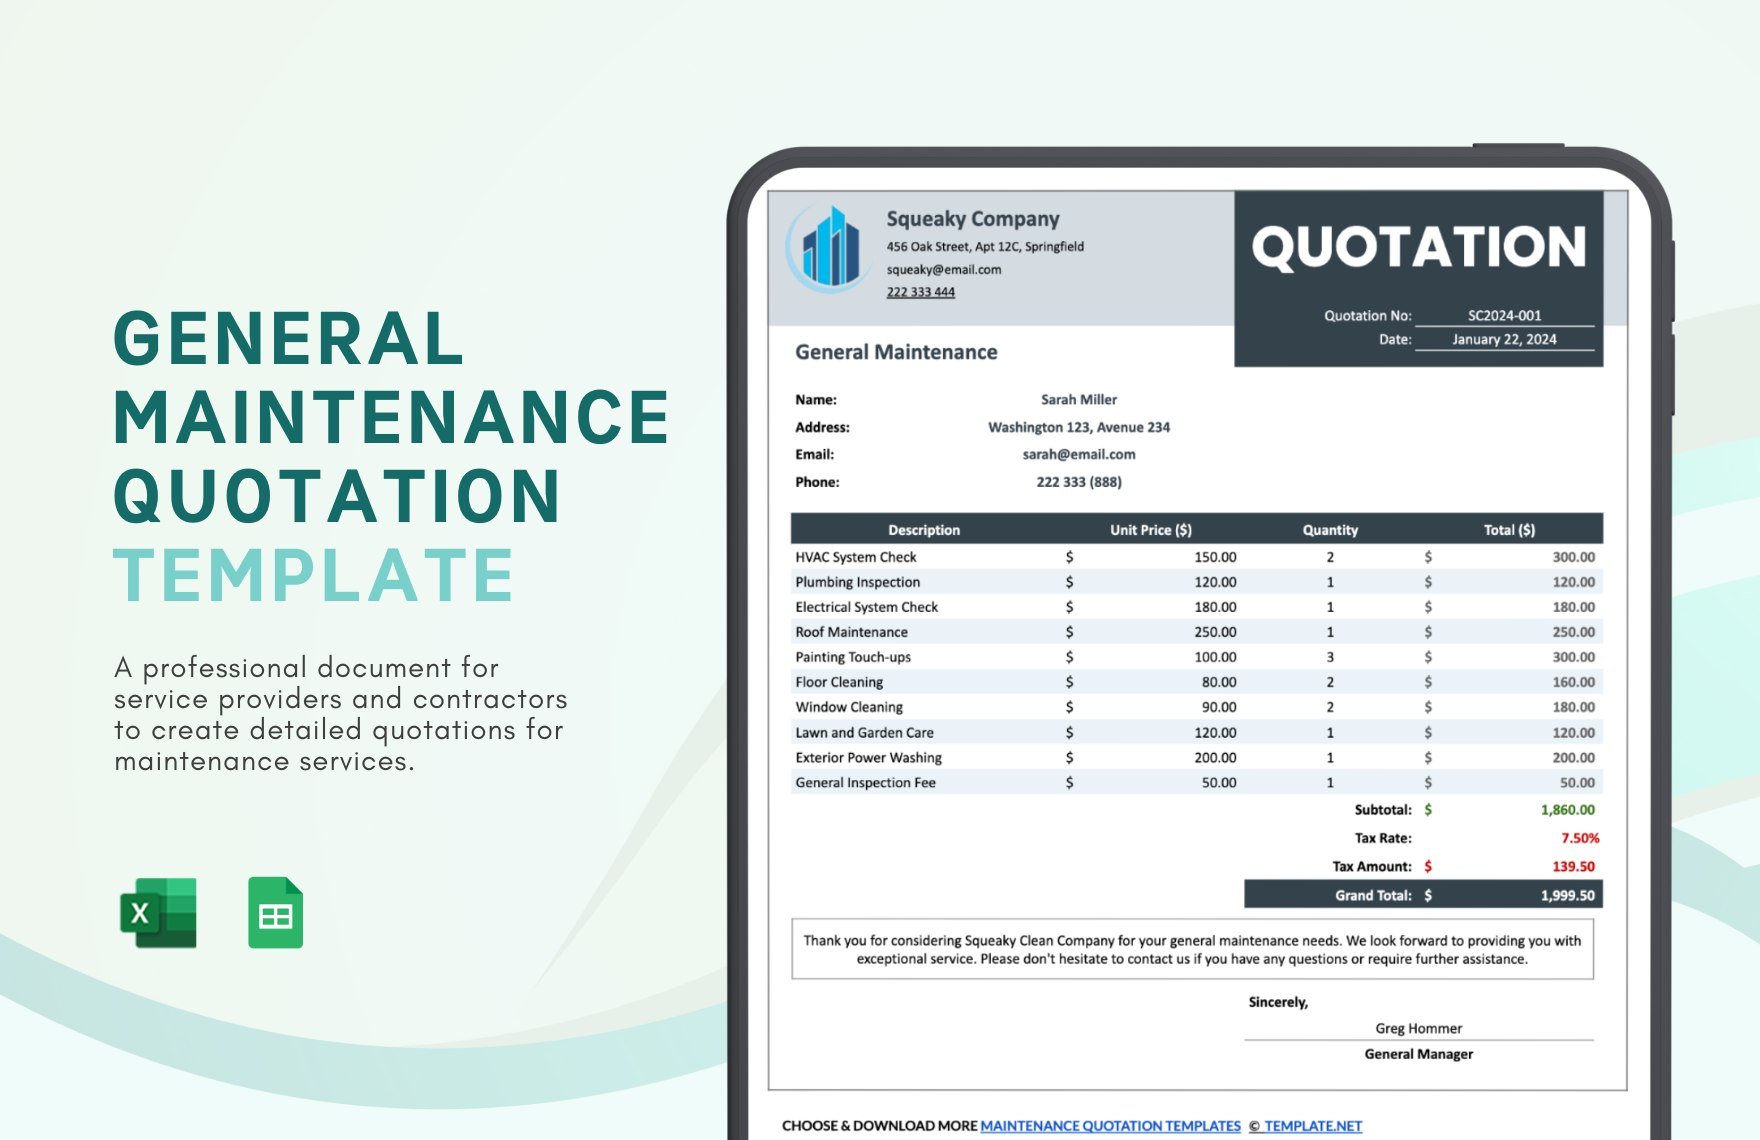 Free General Maintenance Quotation Template in Excel, Google Sheets